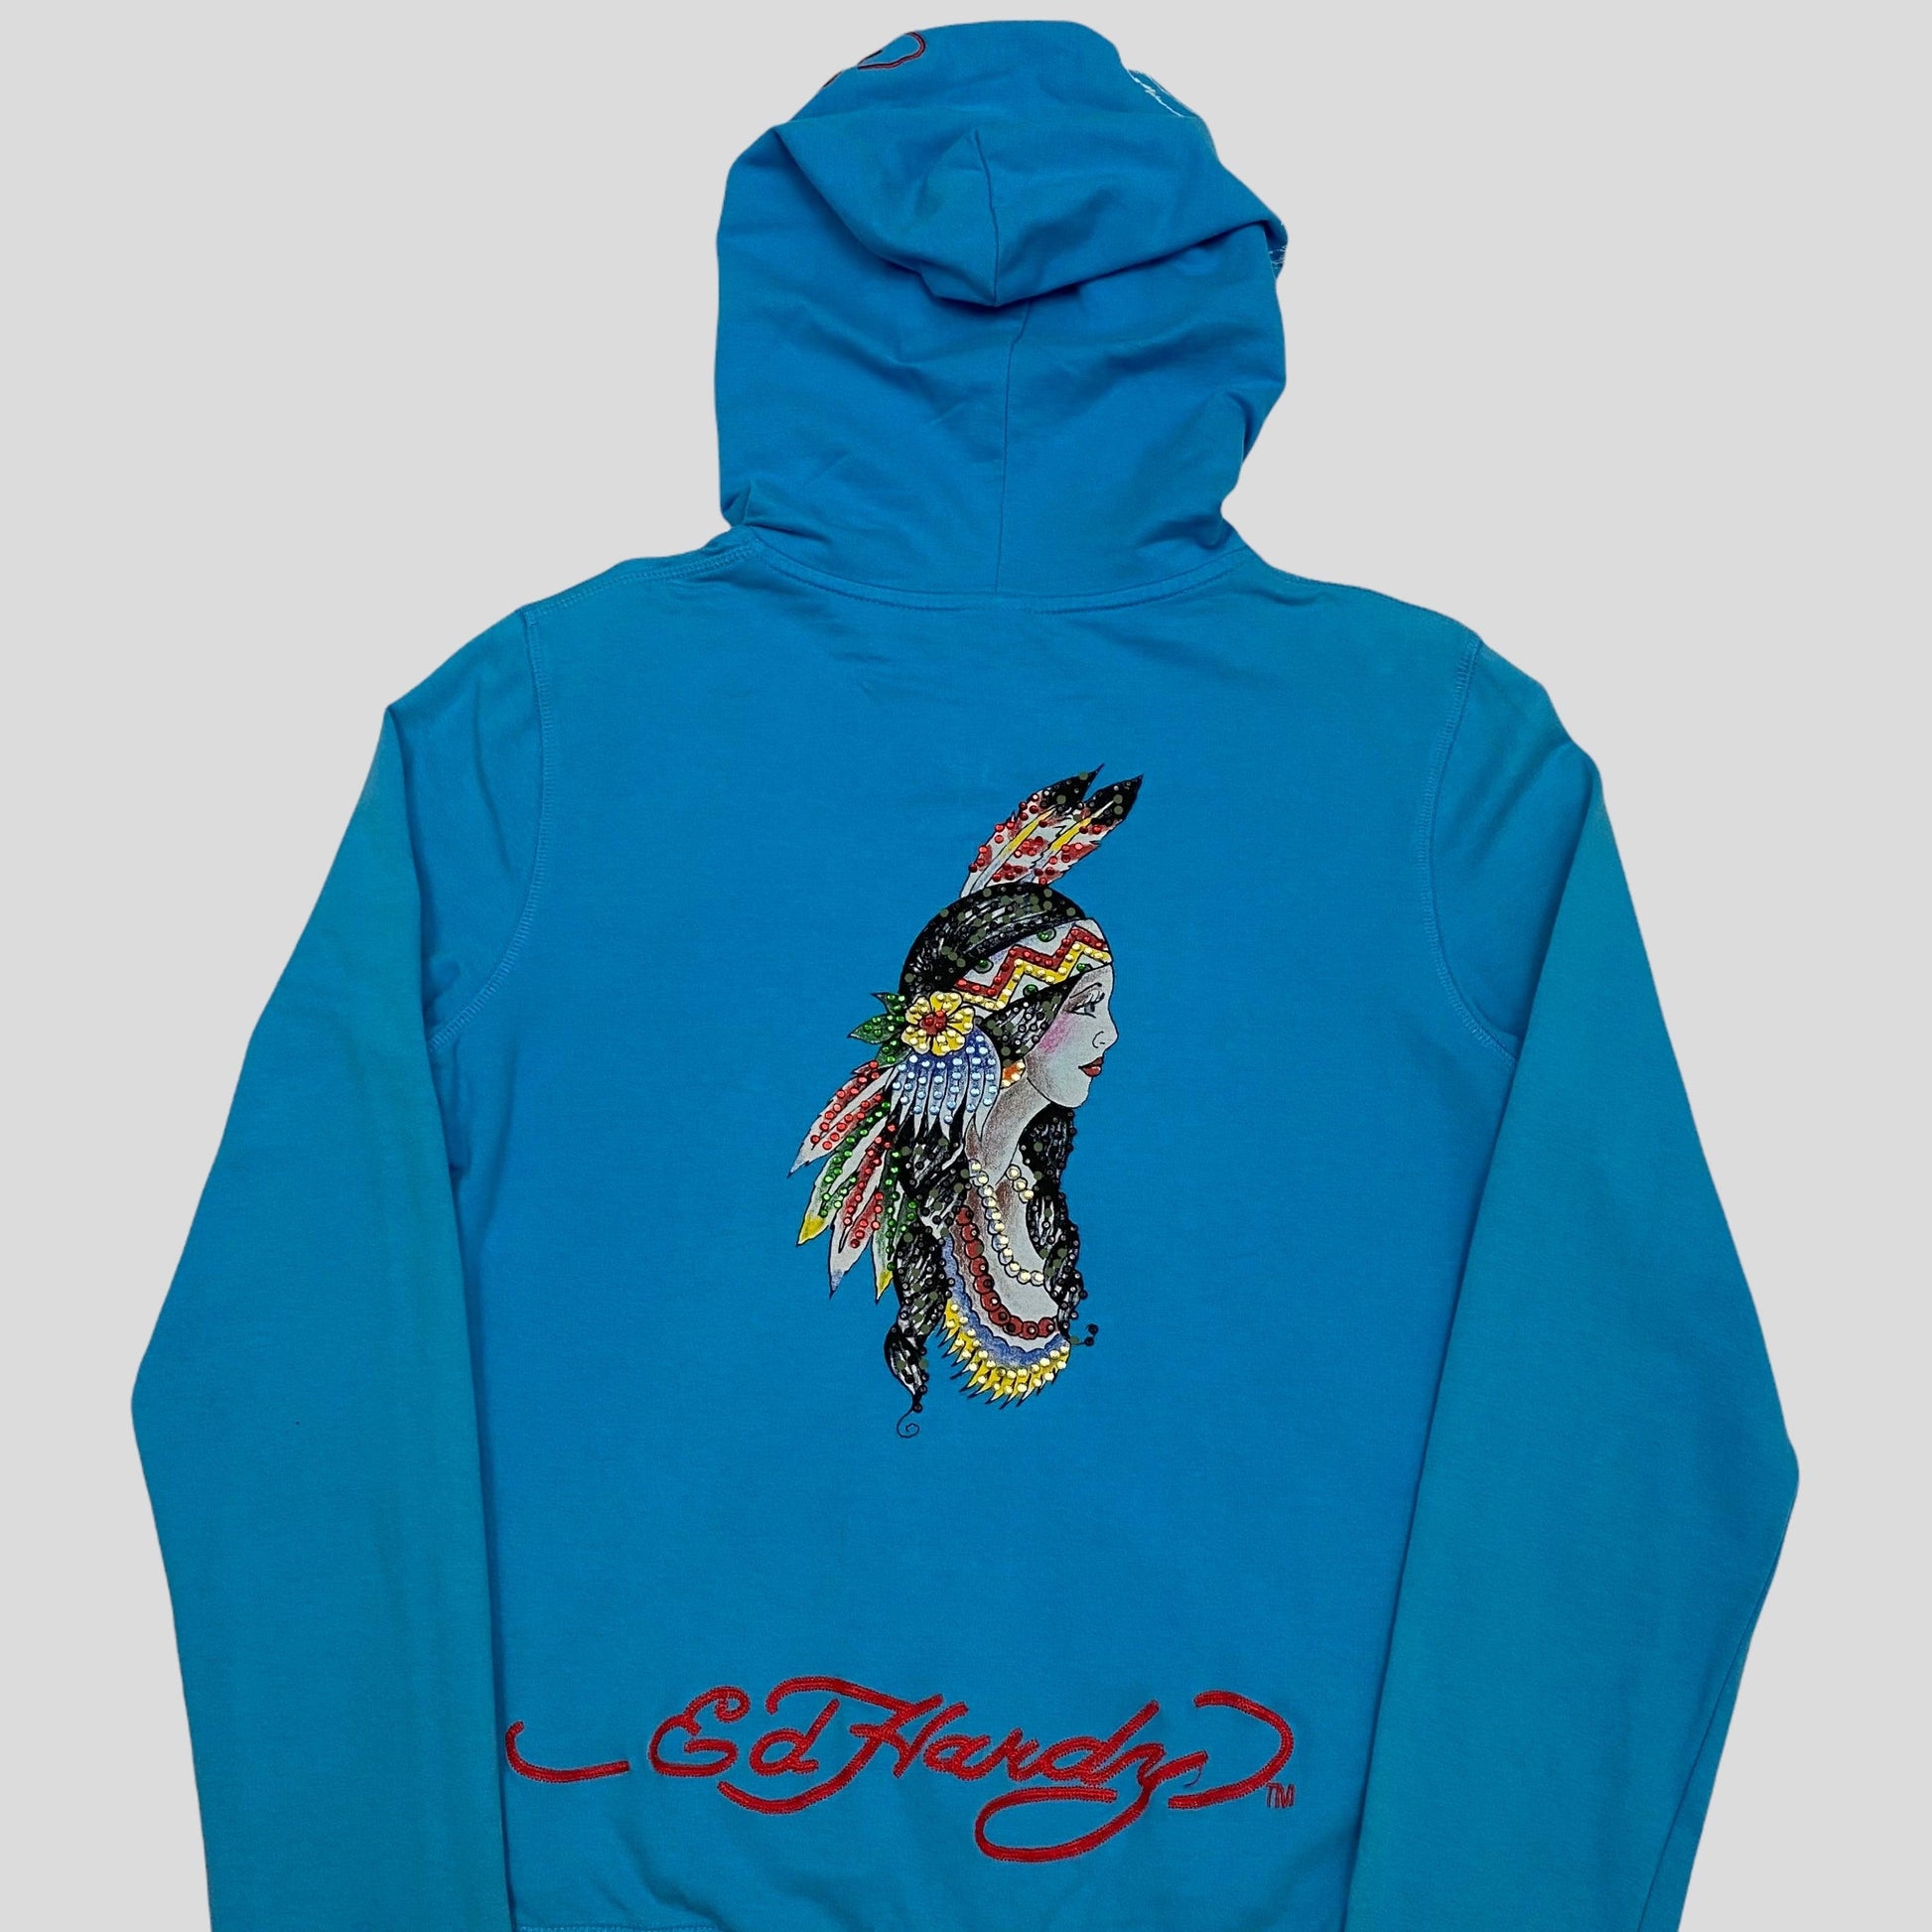 Ed Hardy by Christian Audigier Hoodie - S - Known Source